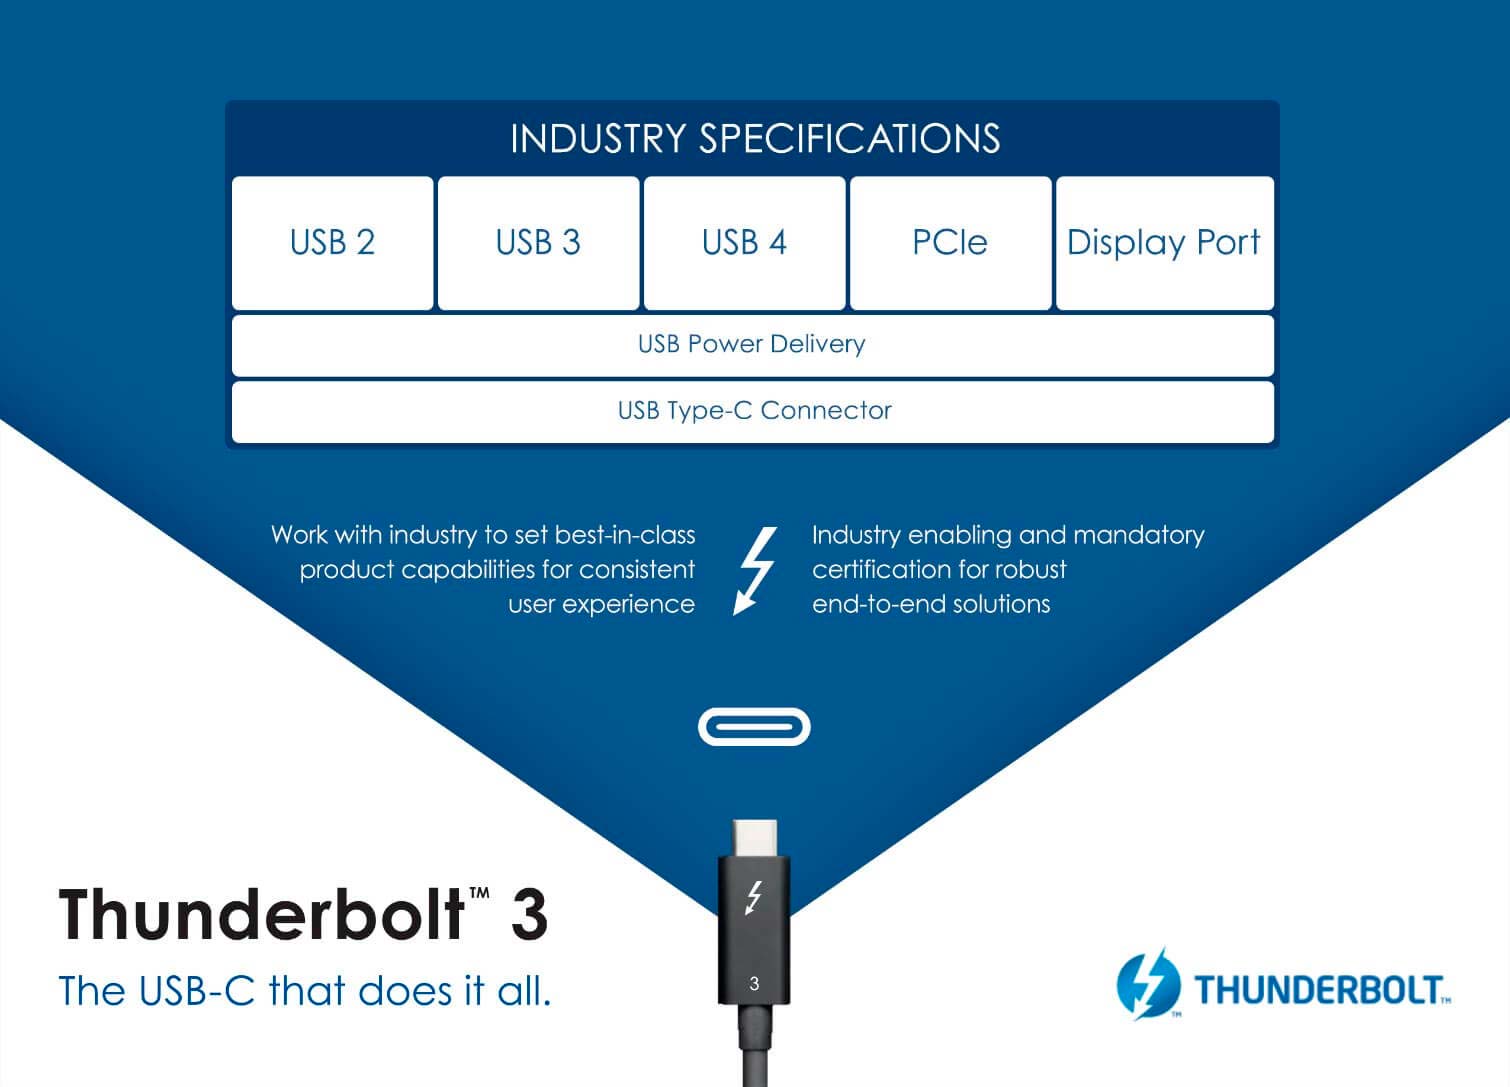 USB 4 standard doubles the speed of USB 3.2 with transfer rates of up to 40 Gbit/s